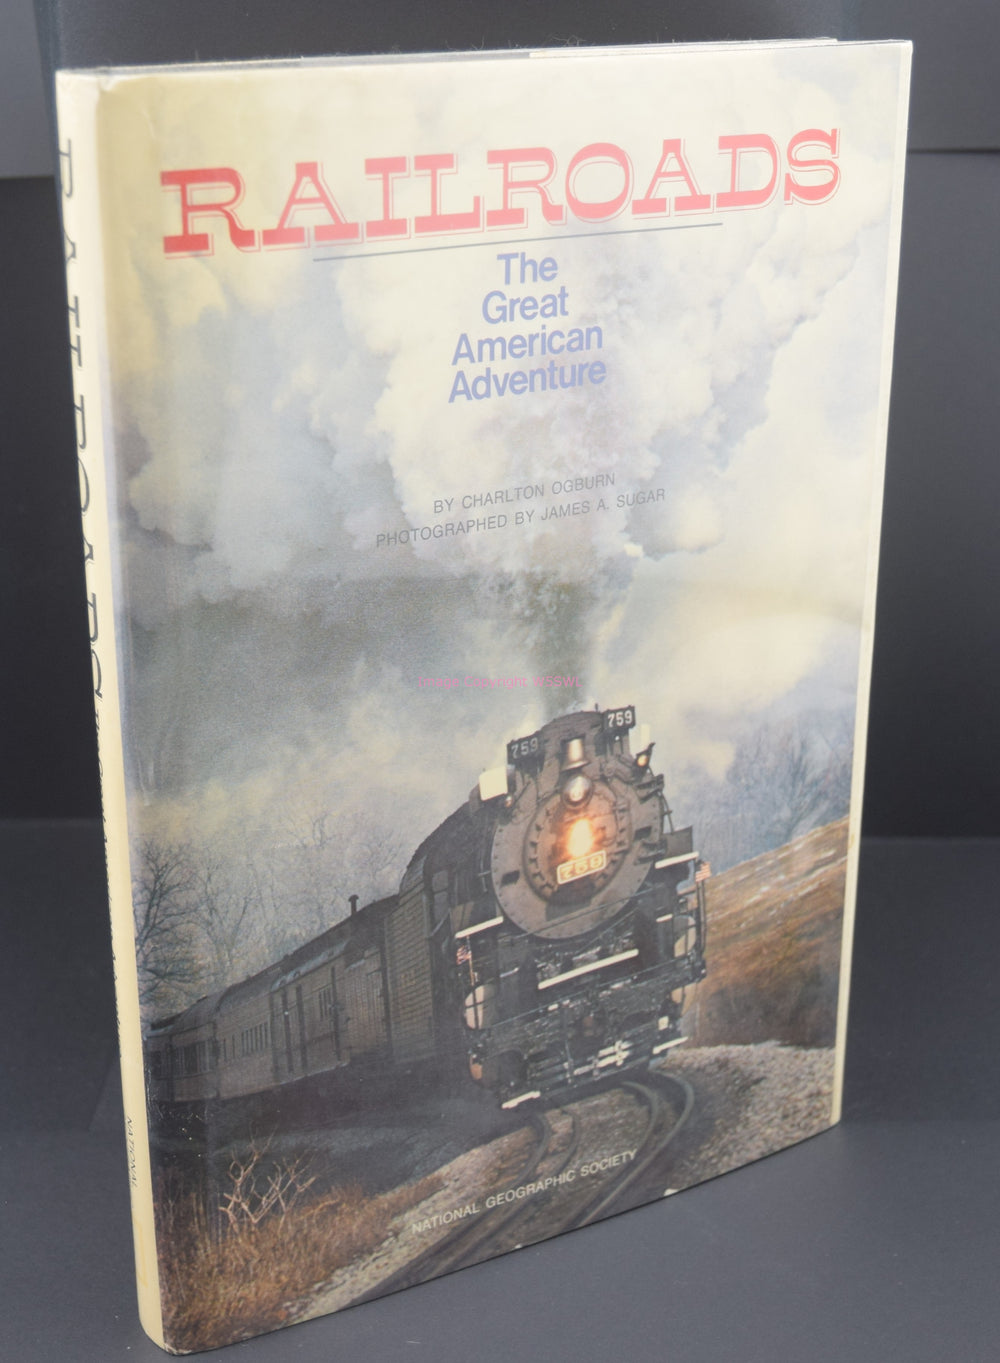 Railroads - The Great American Adventure by Charlton Ogburn - Dave's Hobby Shop by W5SWL